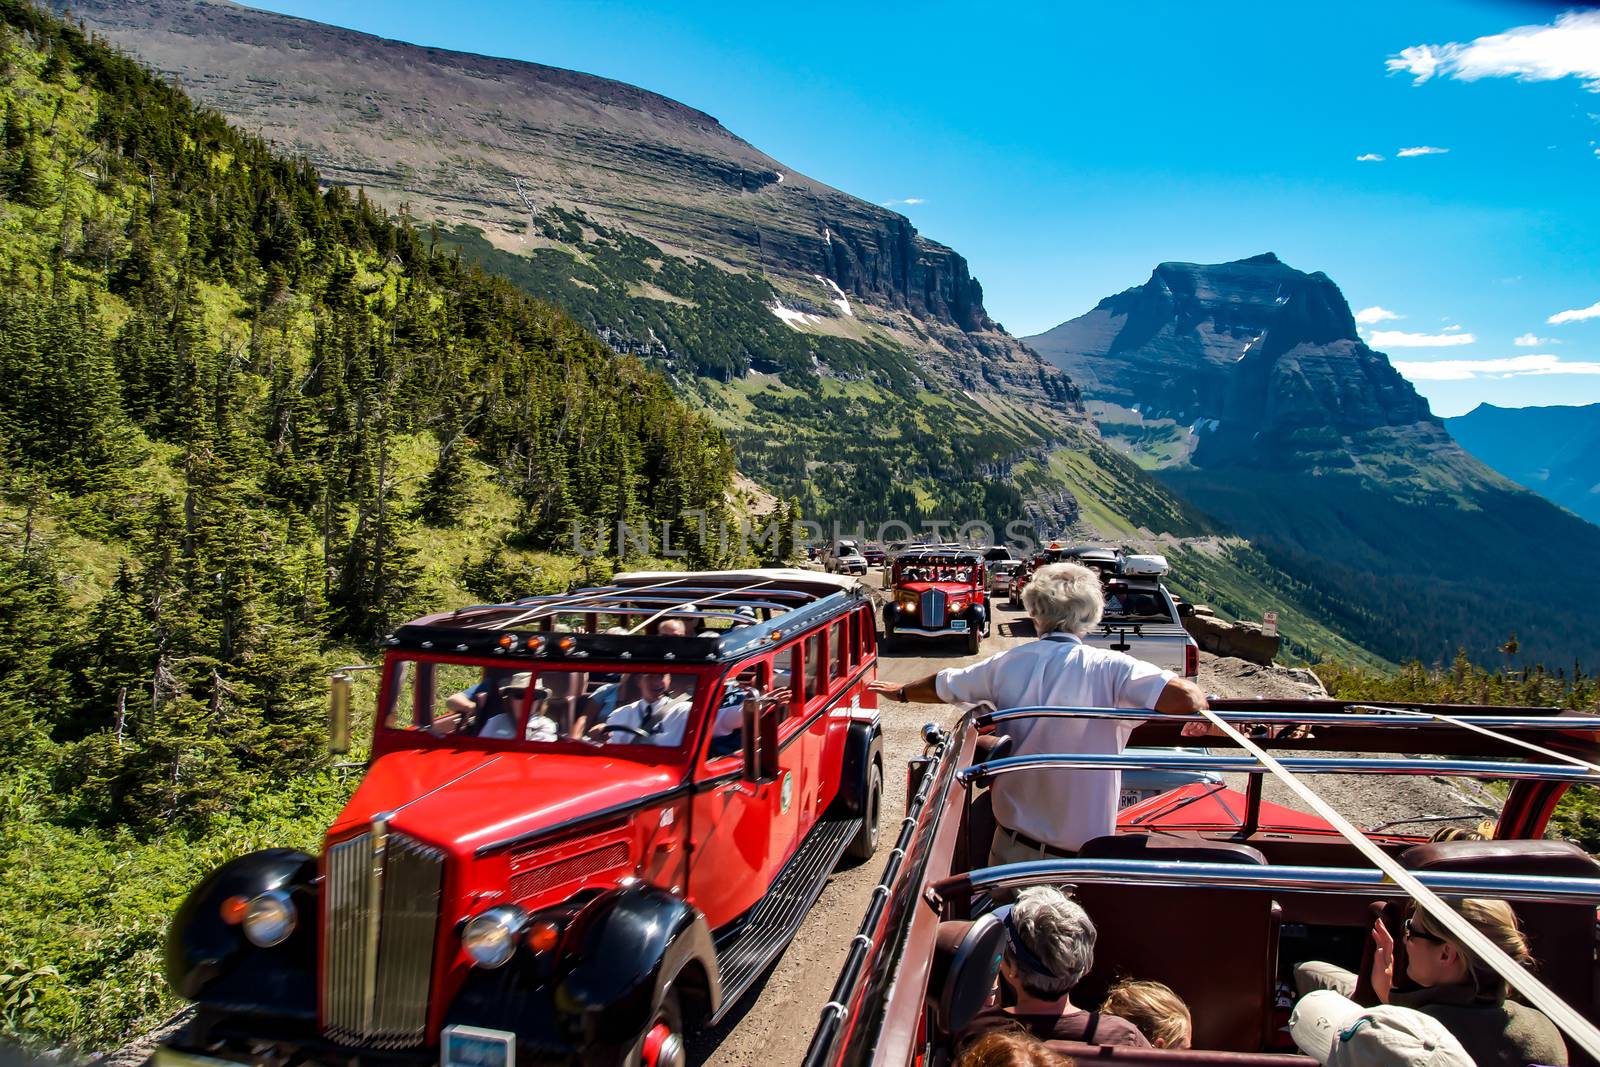 Traffic on Going to the Sun Road, Glacier National Park, MontanaPhoto taken on: July 11th, 2015.